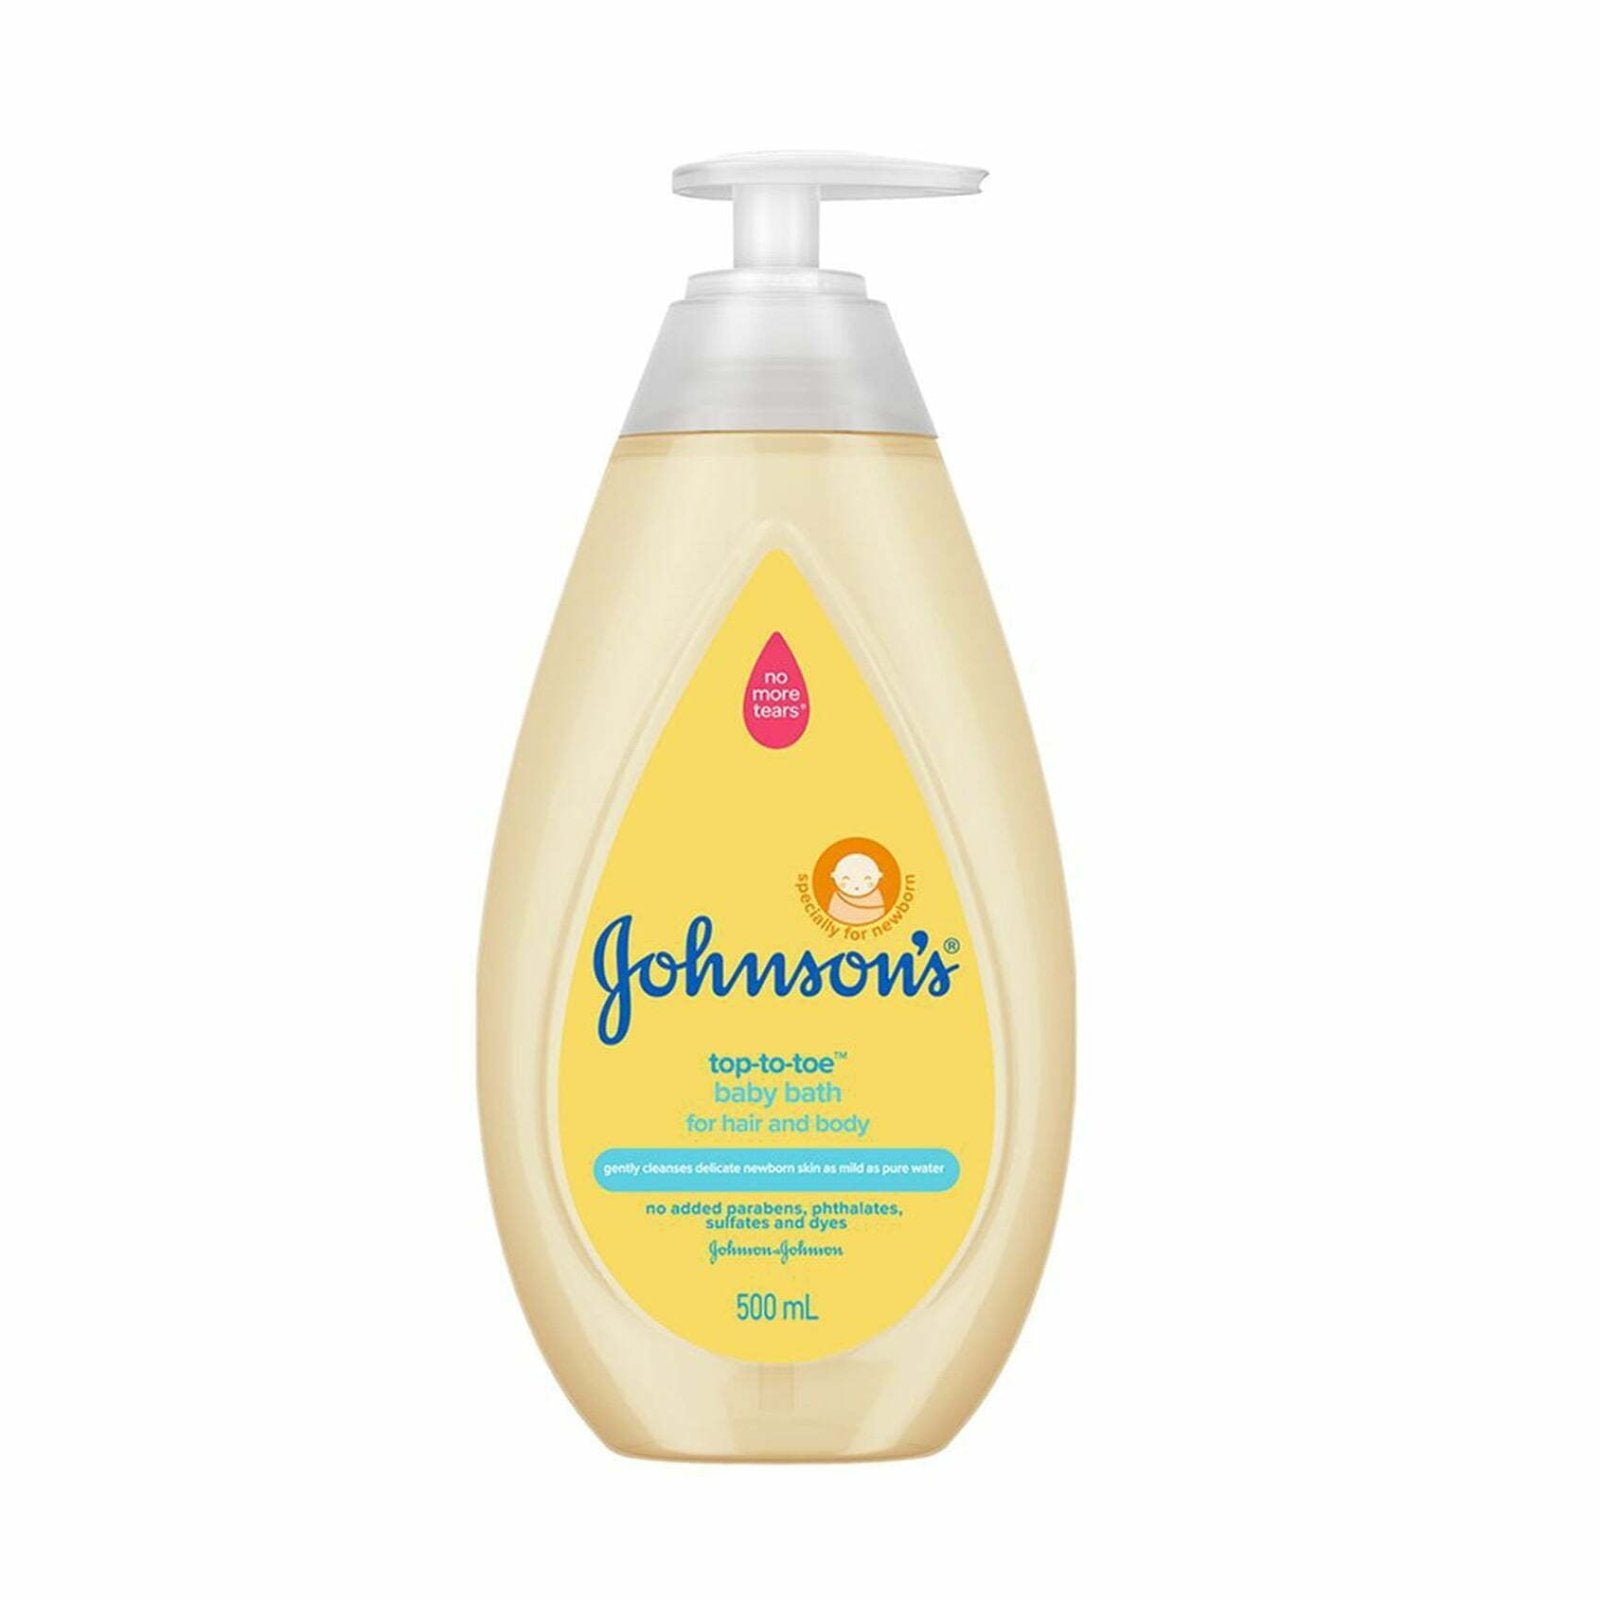 Hair and Body Bath 500ml Top-To-Toe by Johnson's